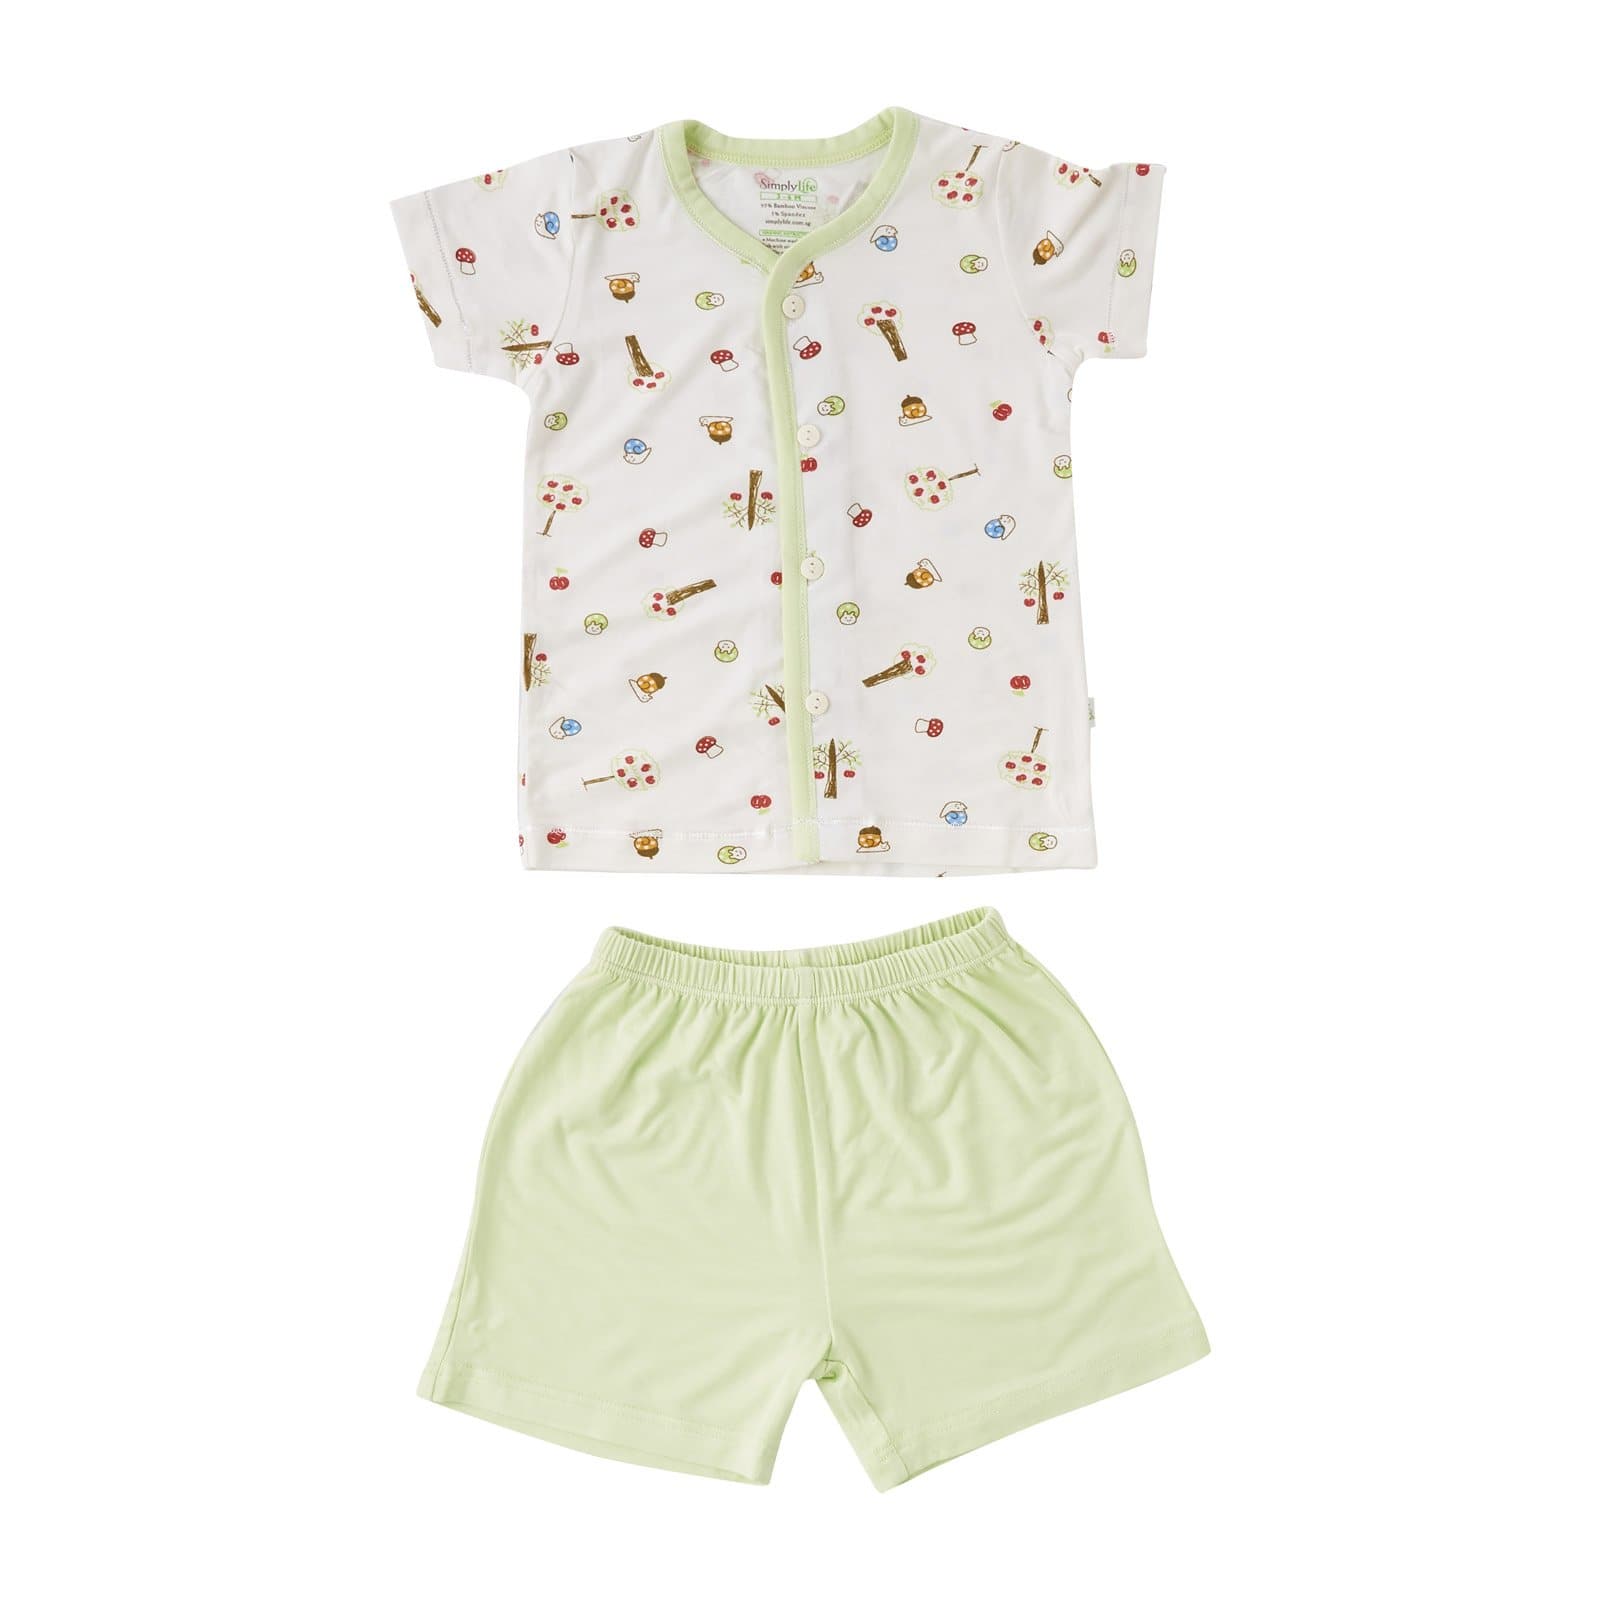 Apples - Short sleeved button vest with shorts (Mint) - Simply Life